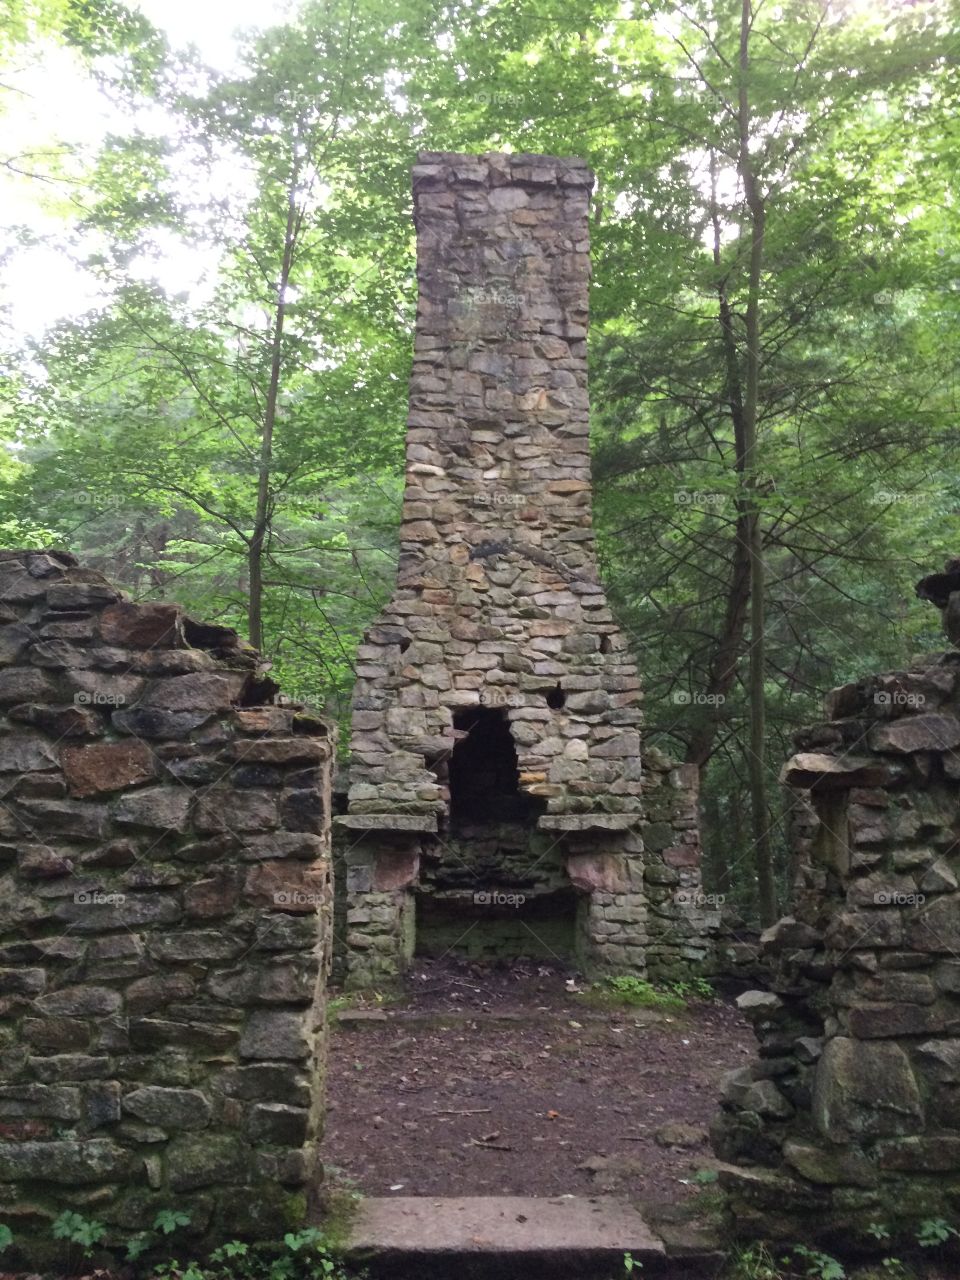 Ruins of a house. Found in the woods of PA near Linn State Park